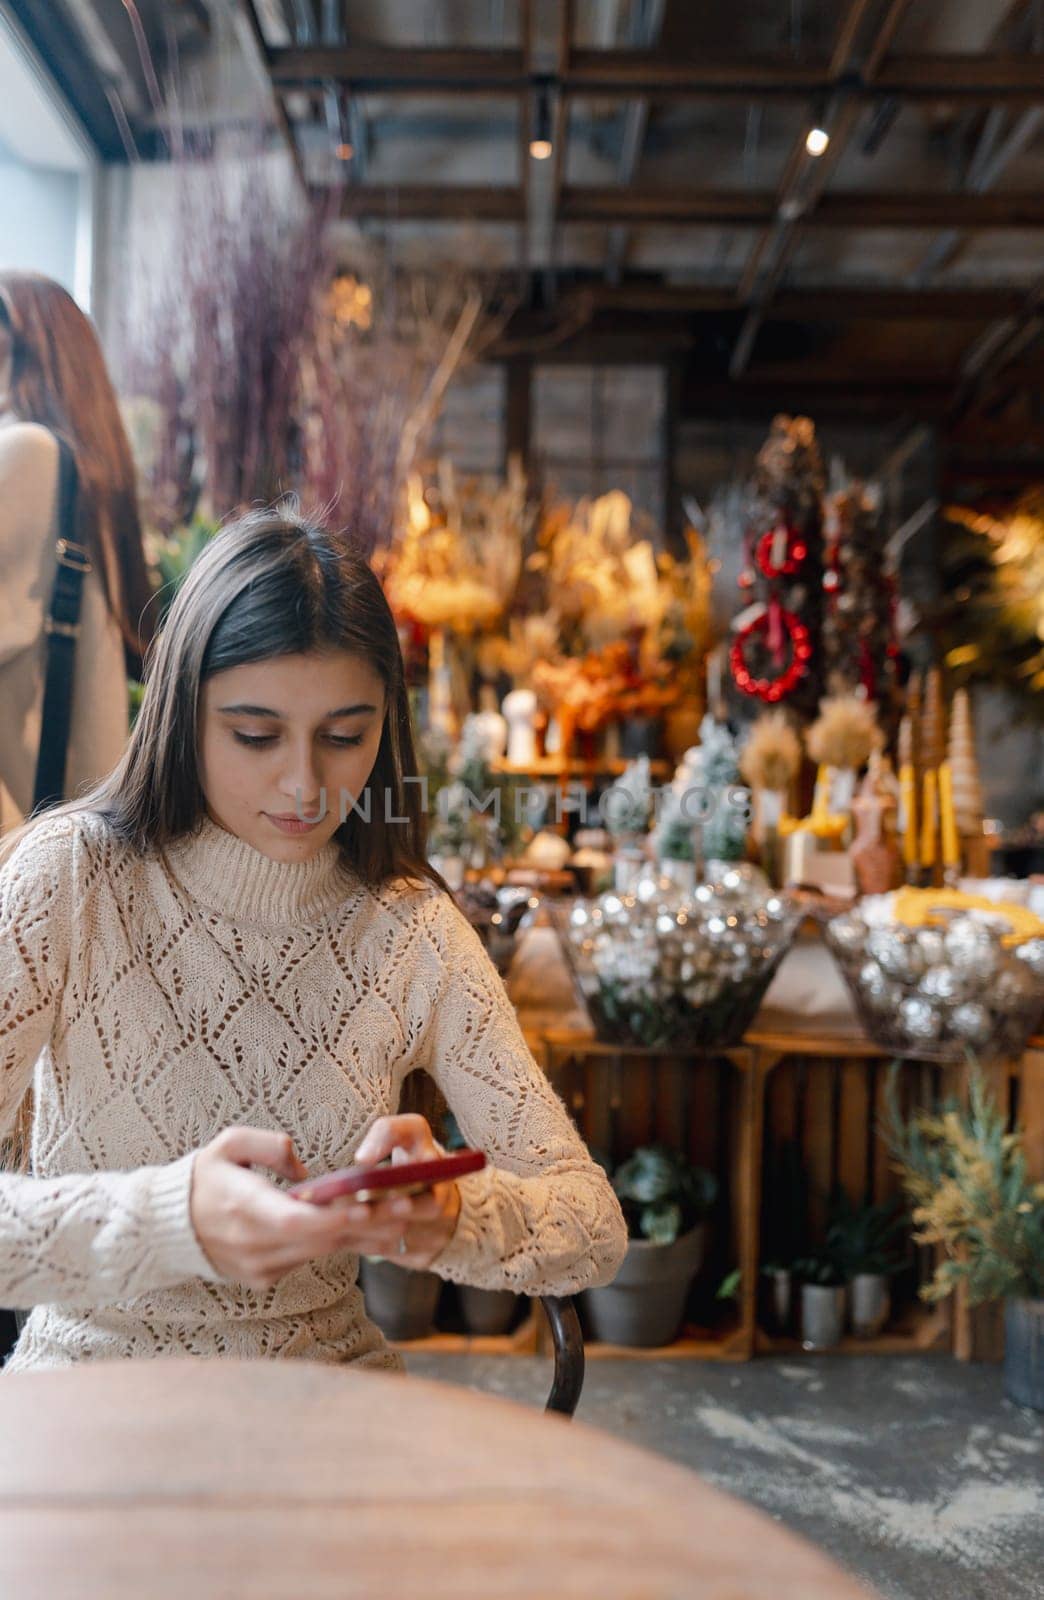 In the decor store, a beautiful young woman is seen with her phone. by teksomolika